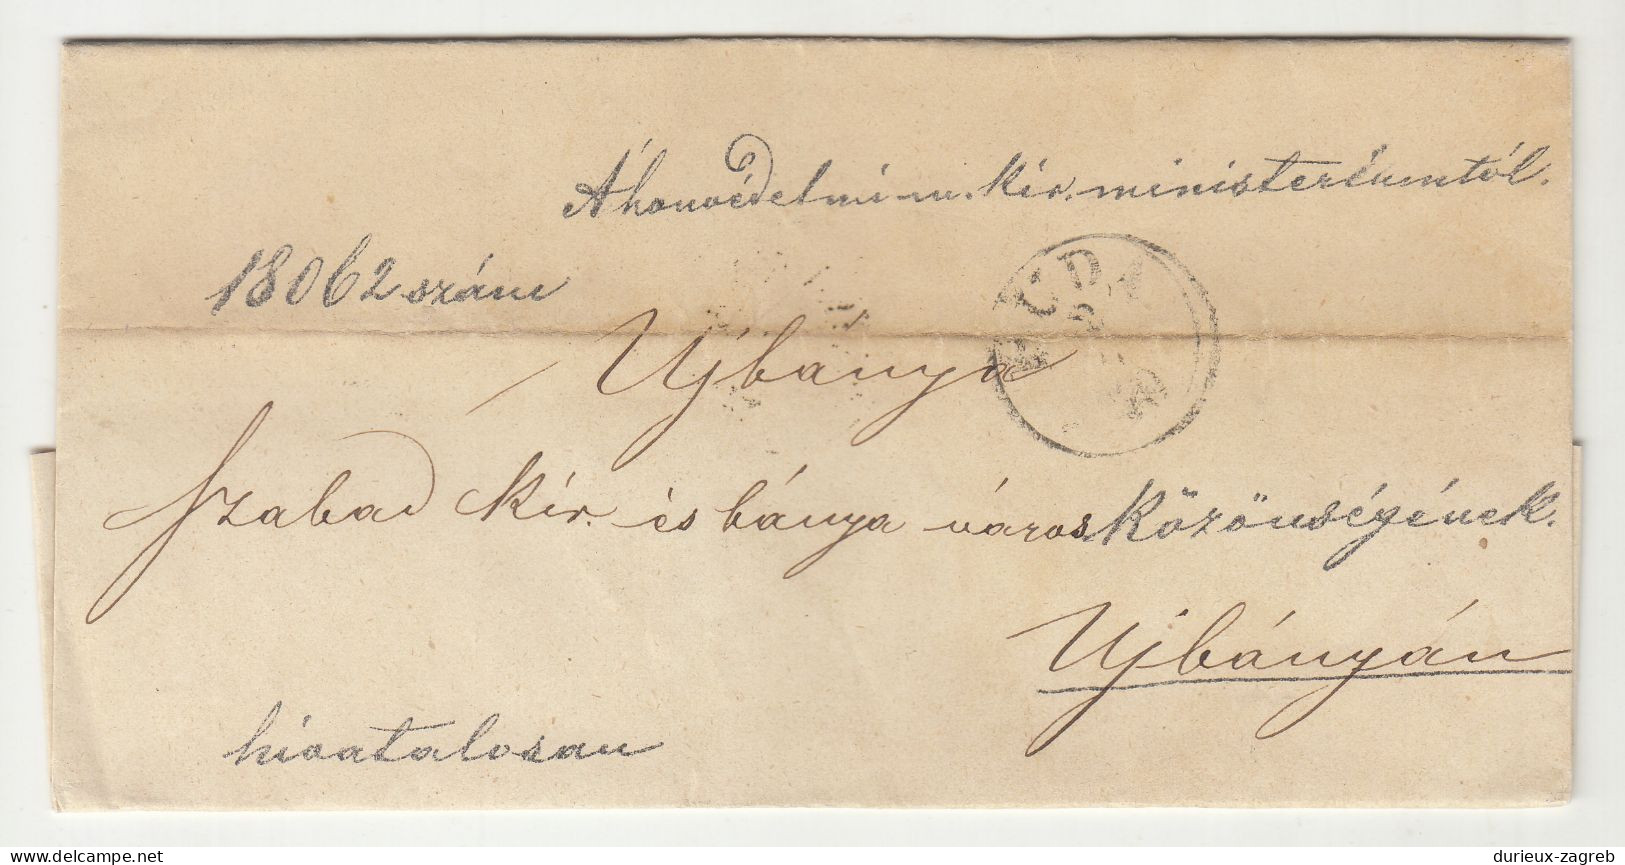 Hungary 3 Ex Offo Letter Covers Posted 1869/70 Buda B240510 - Covers & Documents